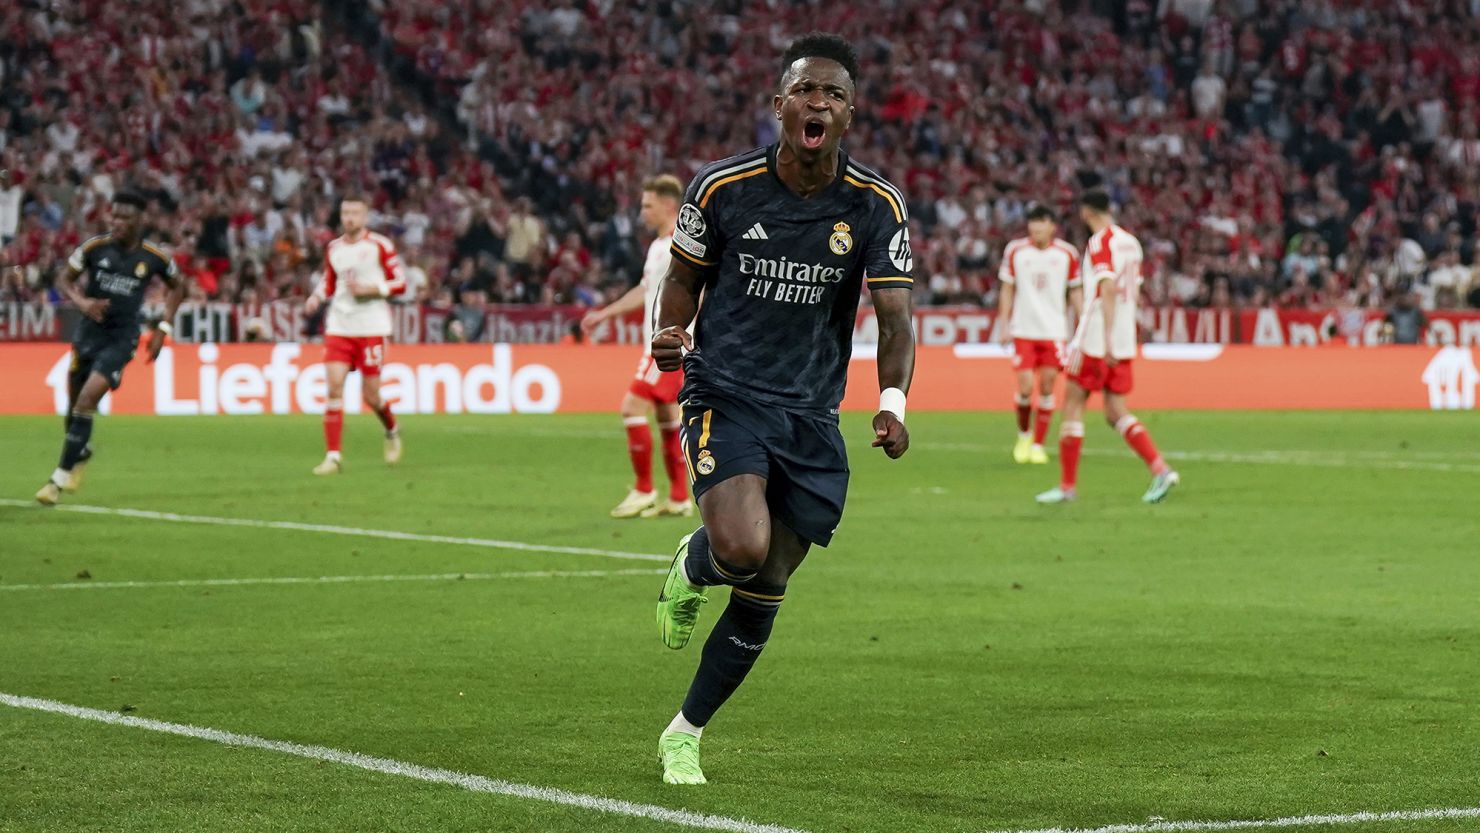 Vinícius Jr. scored two goals for Real Madrid as the Champions League semifinal first leg ended 2-2.